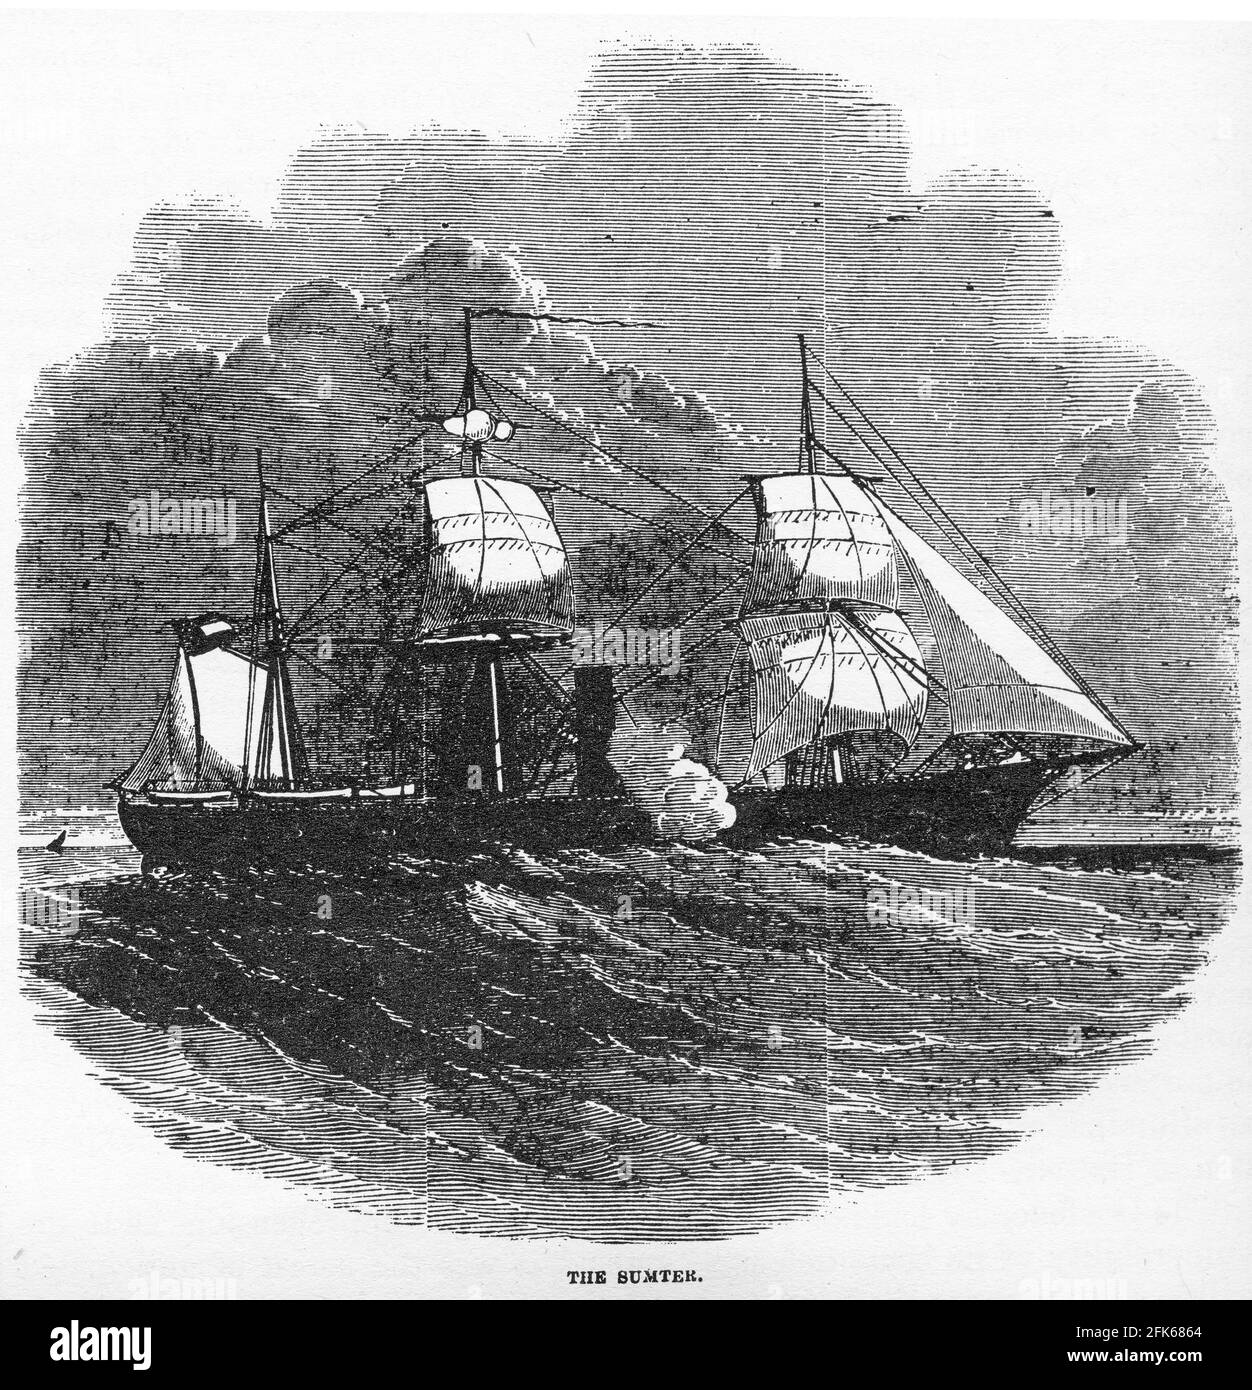 Engraving of CSS Sumter, converted from the 1859-built merchant steamer Habana. the Sumter was the first steam cruiser of the Confederate States Navy during the American Civil War. She operated as a commerce raider in the Caribbean and in the Atlantic Ocean against Union merchant shipping between July and December 1861, taking eighteen prizes, but was trapped in Gibraltar by Union Navy warships. Stock Photo